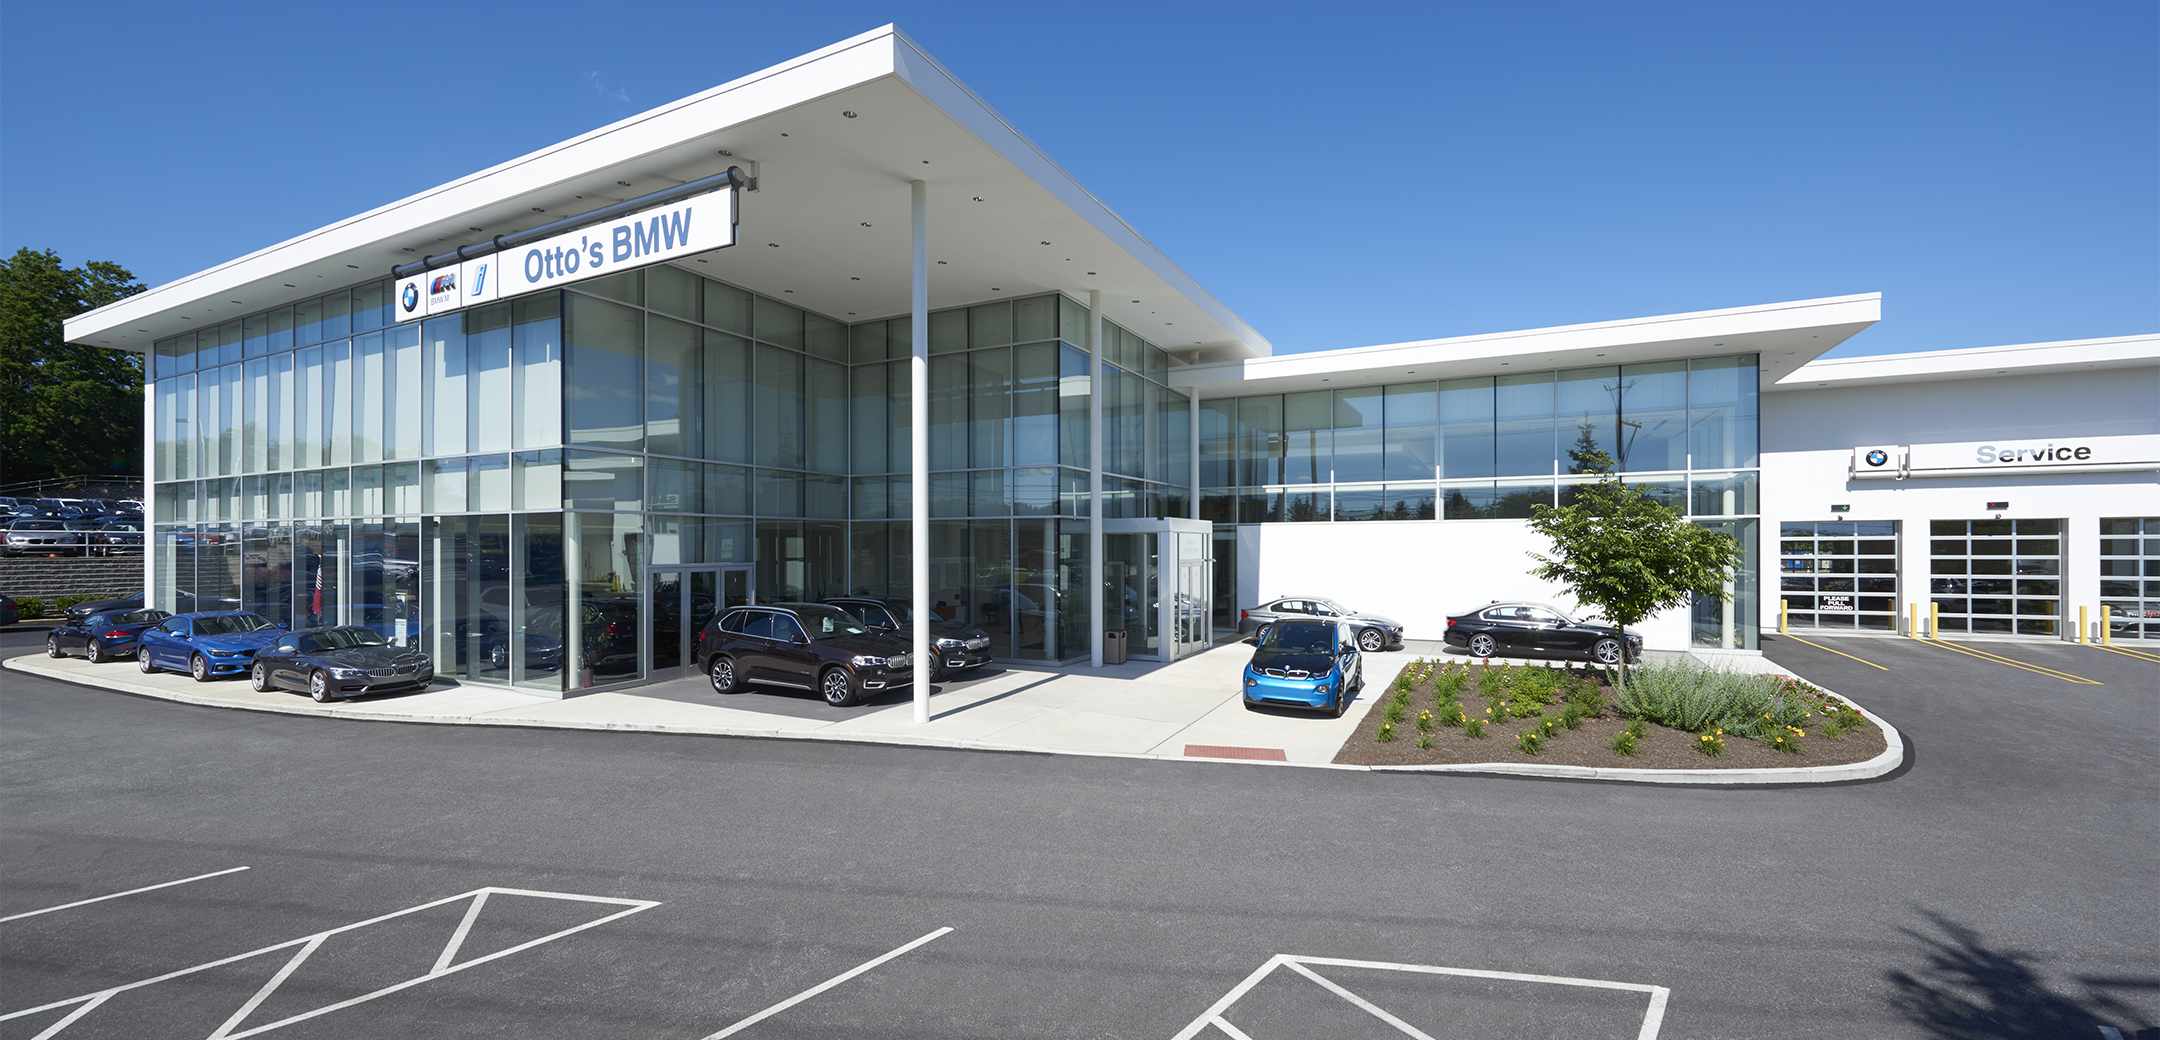 The exterior view of the Ottos BMW building, showcasing the two story, floor to ceiling glass panel design with white support pillars and wall accents with cars placed outside.